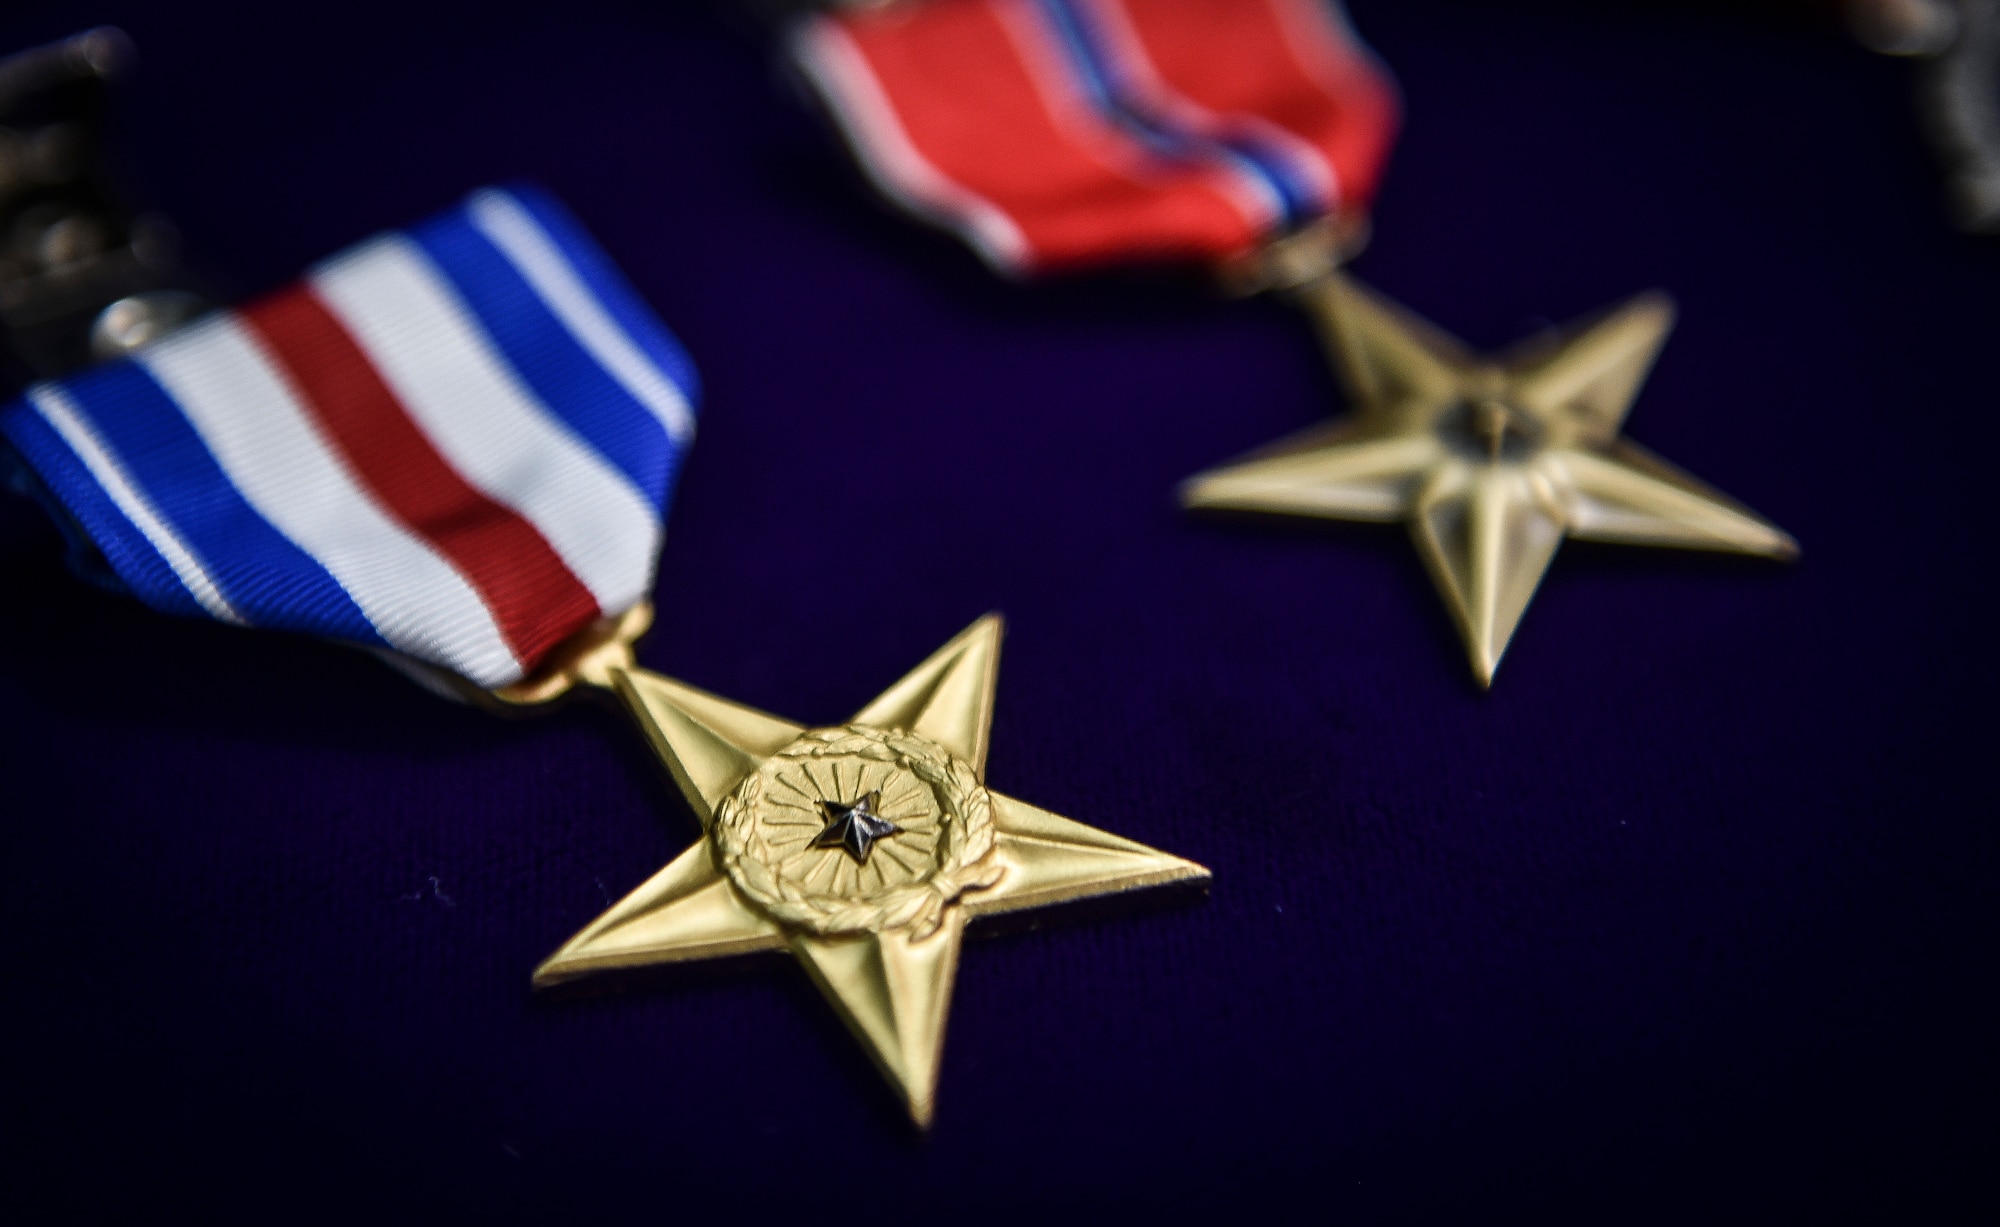 The 73rd Silver Star Medal awarded to an Airman since 9/11 lays on a table before a presentation ceremony at Joint Base Lewis-McChord, Wash., Nov. 16, 2016. The Silver Star Medal is the third-highest medal awarded for gallantry against an armed enemy of the U.S. in combat and was awarded to Staff Sgt. Keaton Thiem, a combat controller with the 22nd Special Tactics Squadron, for using air power to ensure the safety of his 100-plus man SOF element during a 14-hour firefight with no regard for his own personal safety, while deployed with U.S. Army Special Operations Forces in Afghanistan.(U.S. Air Force photo by Senior Airman Ryan Conroy)